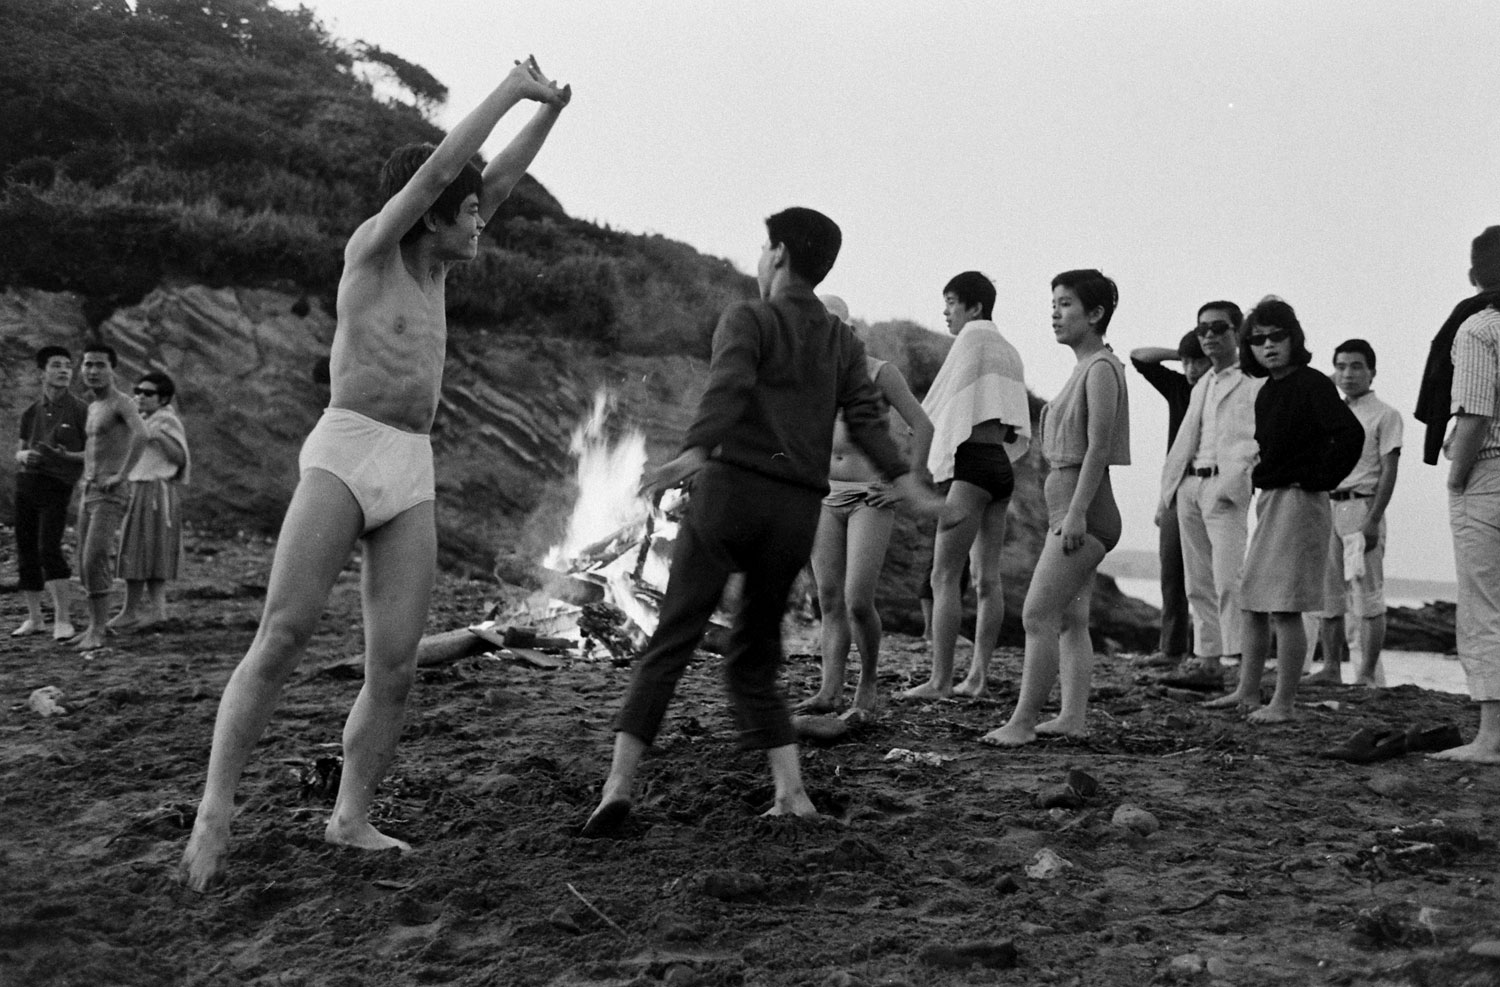 "Naron" (at left, stretching) and friends at dawn after an all-night party at the beach.